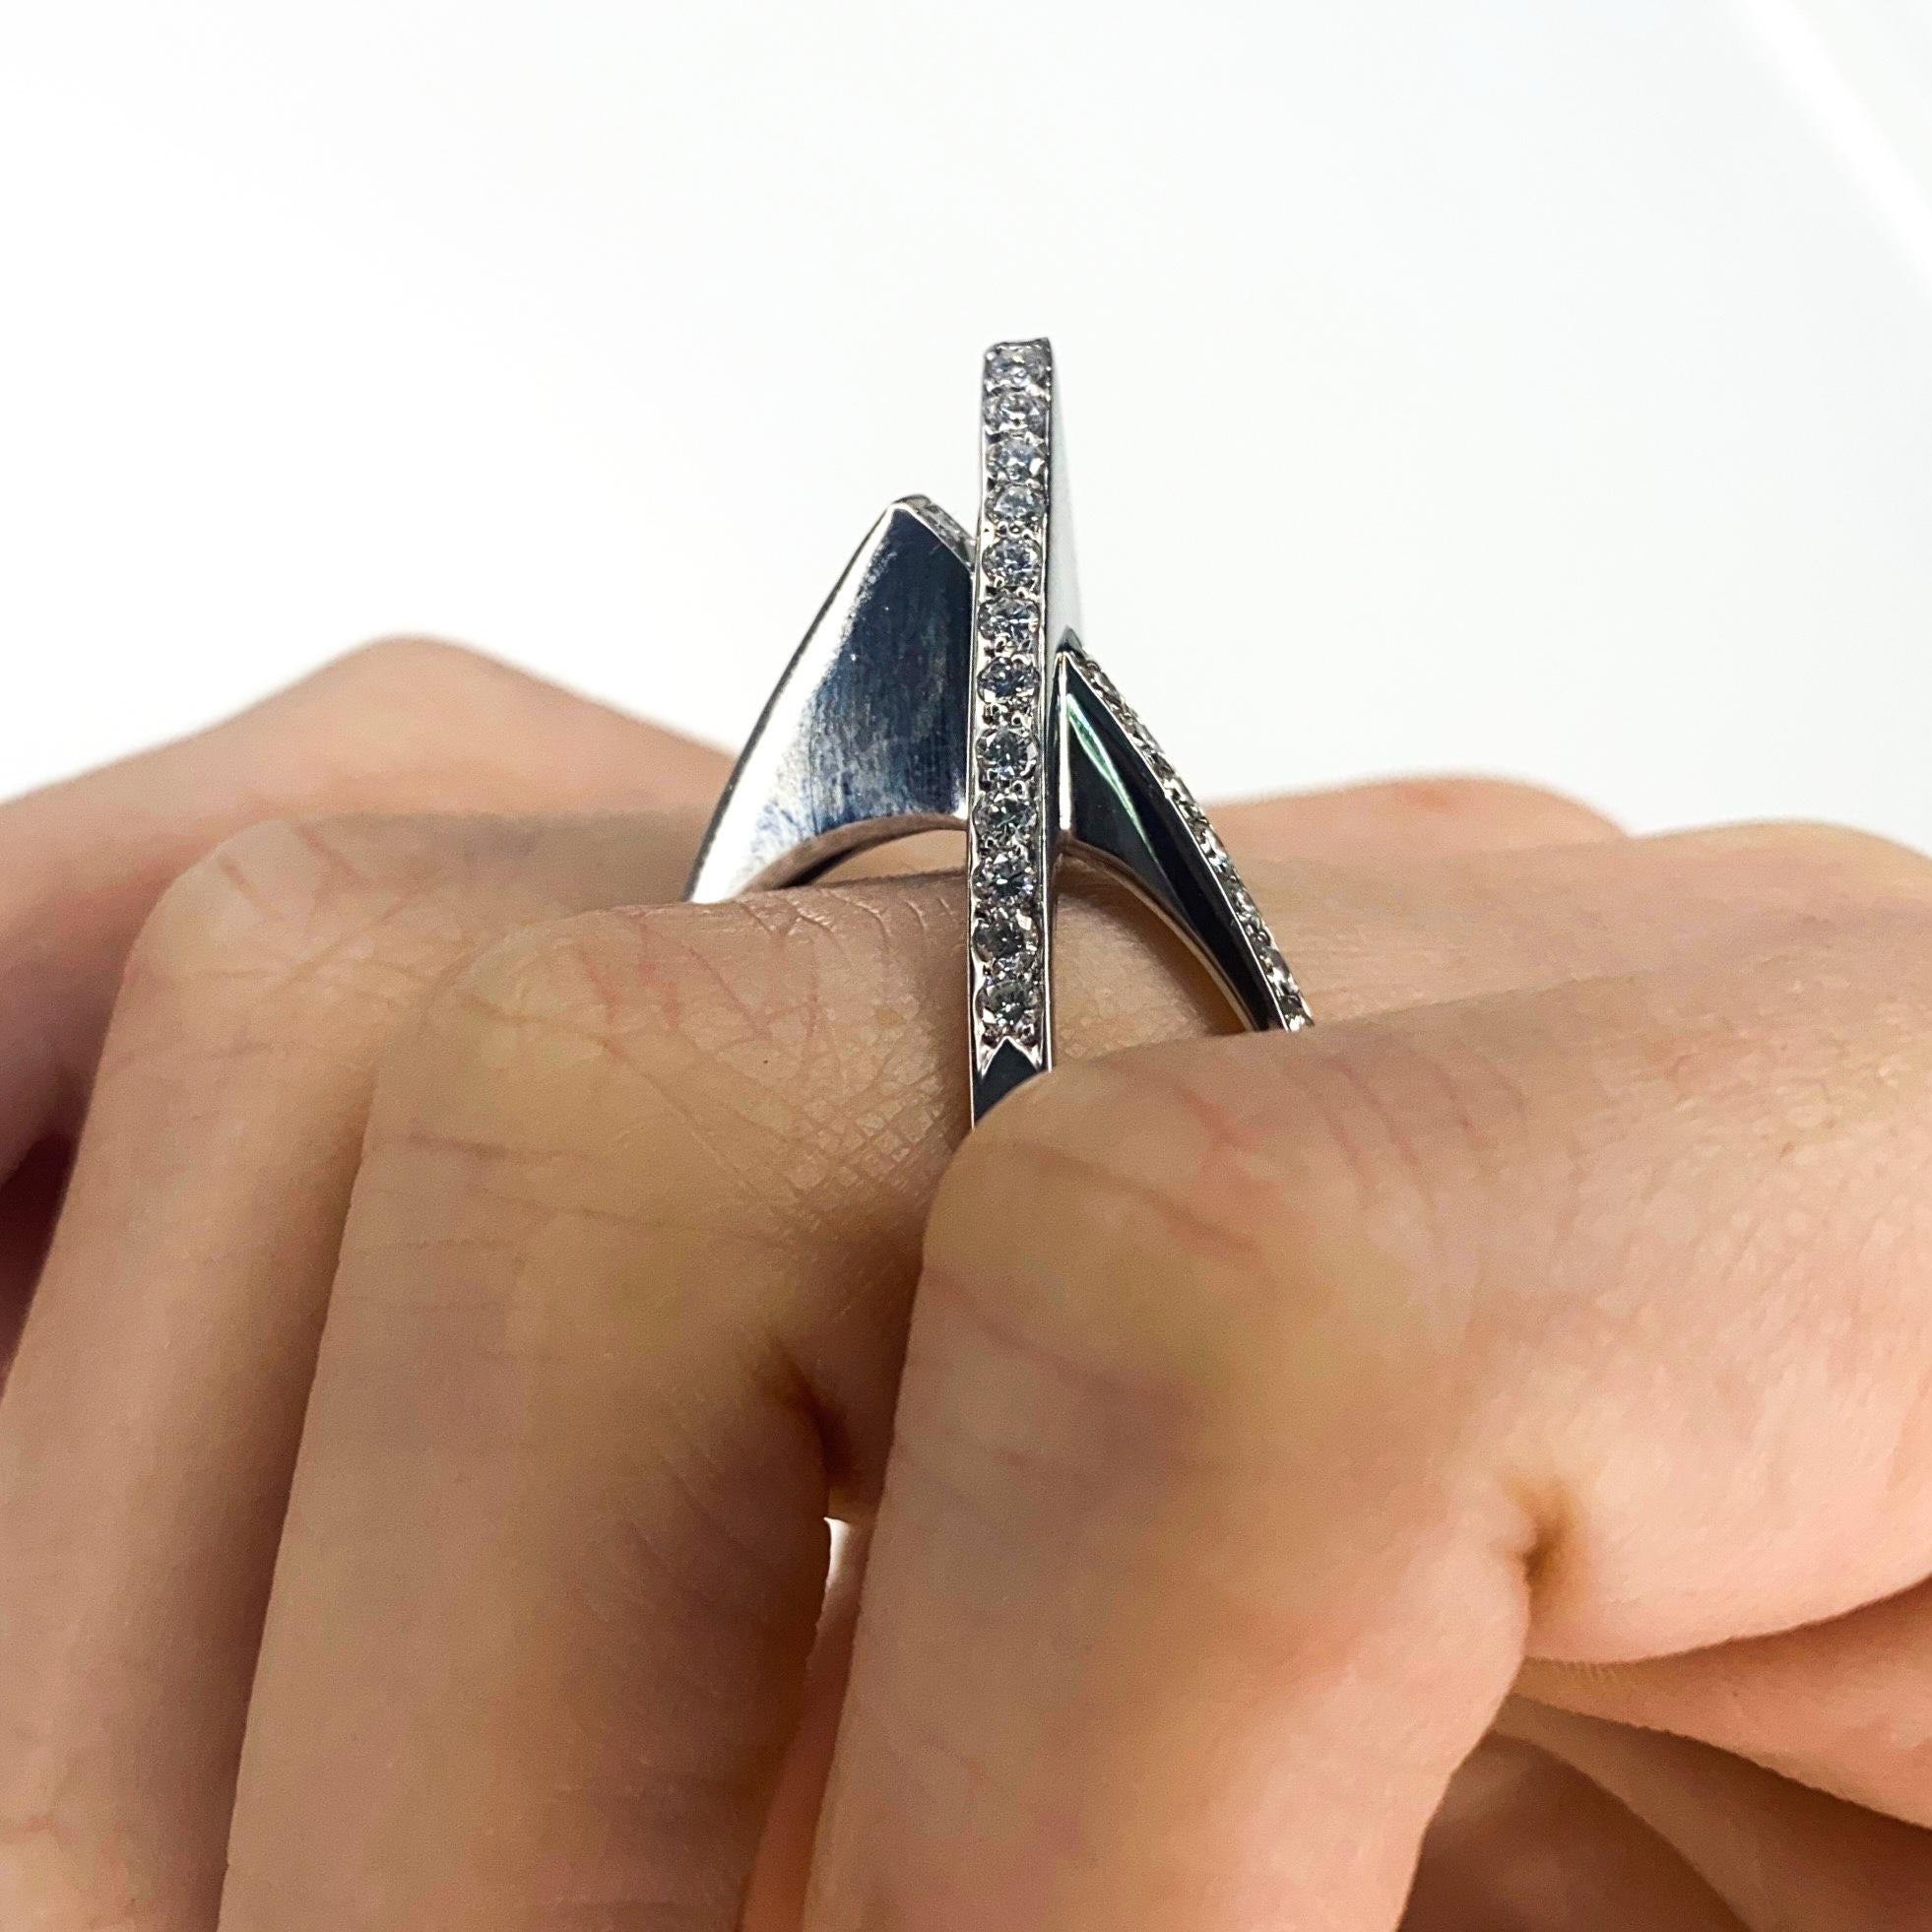 H. Stern Architectural Geometric Cocktail Ring 18Kt White Gold 1.05 Cts Diamonds For Sale 2